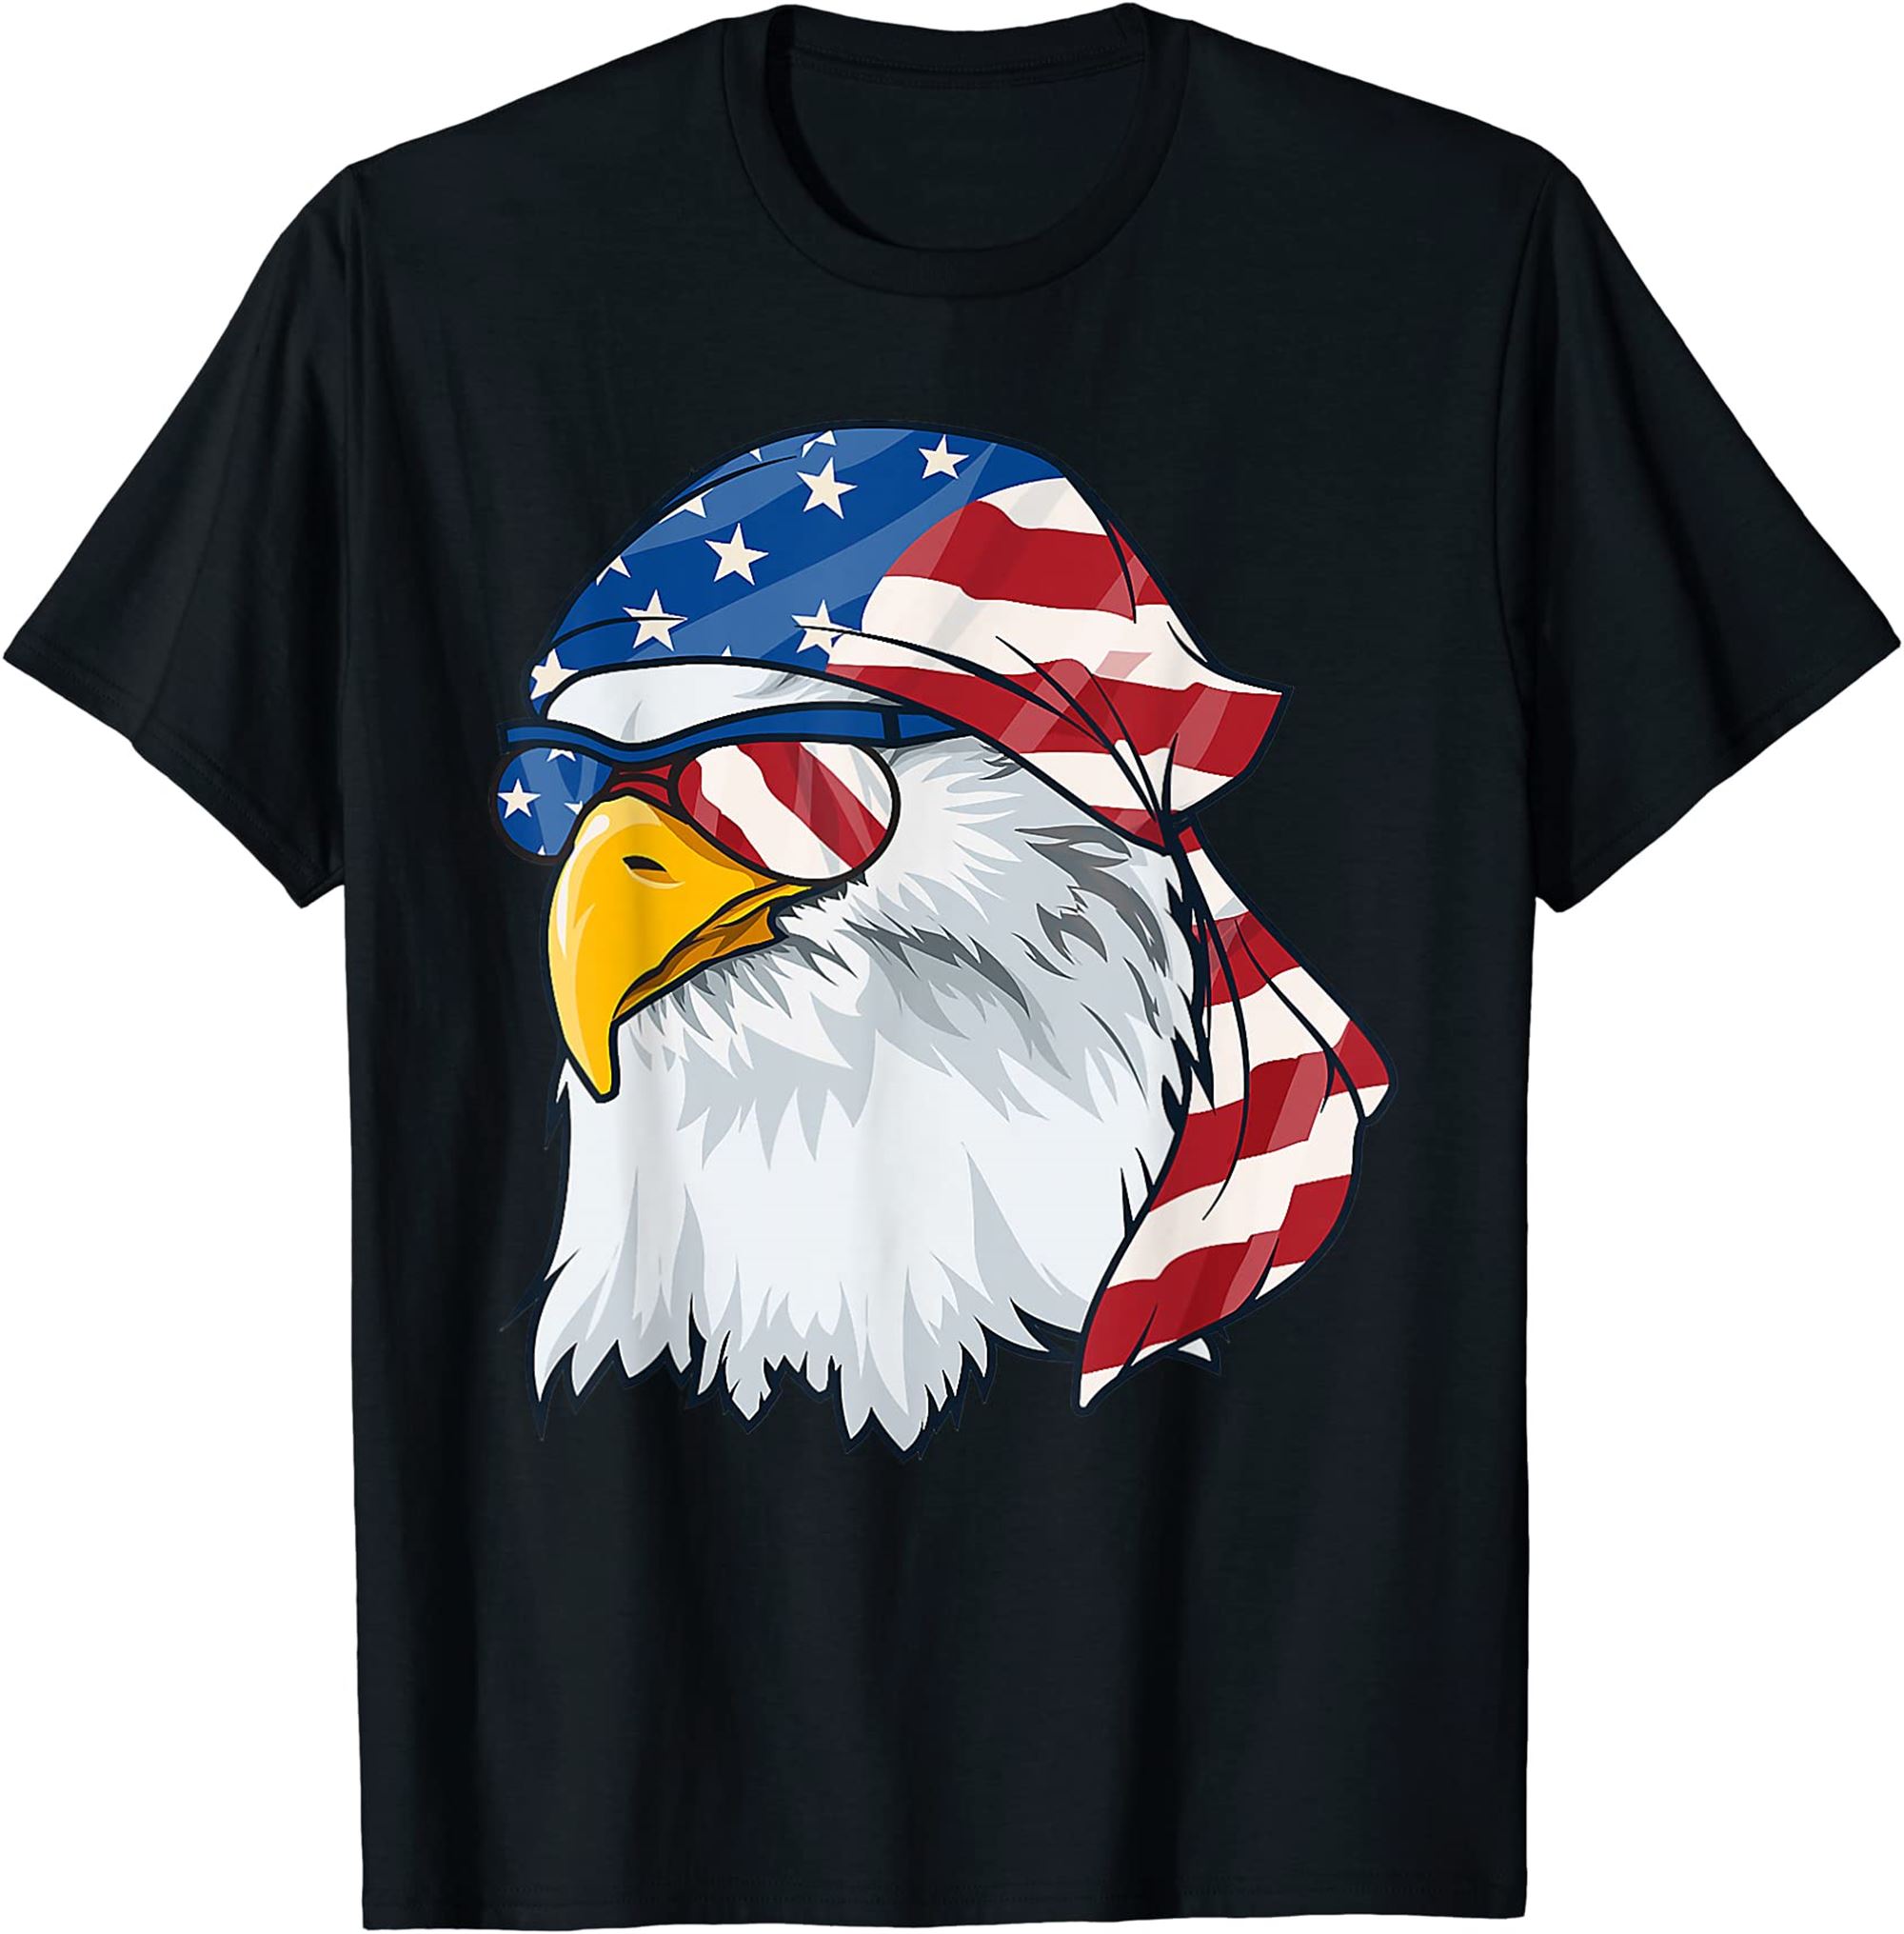 Patriotic Bald Eagle Shirt Men 4th Of July American Flag Usa T-shirt Plus Size Up To 5xl